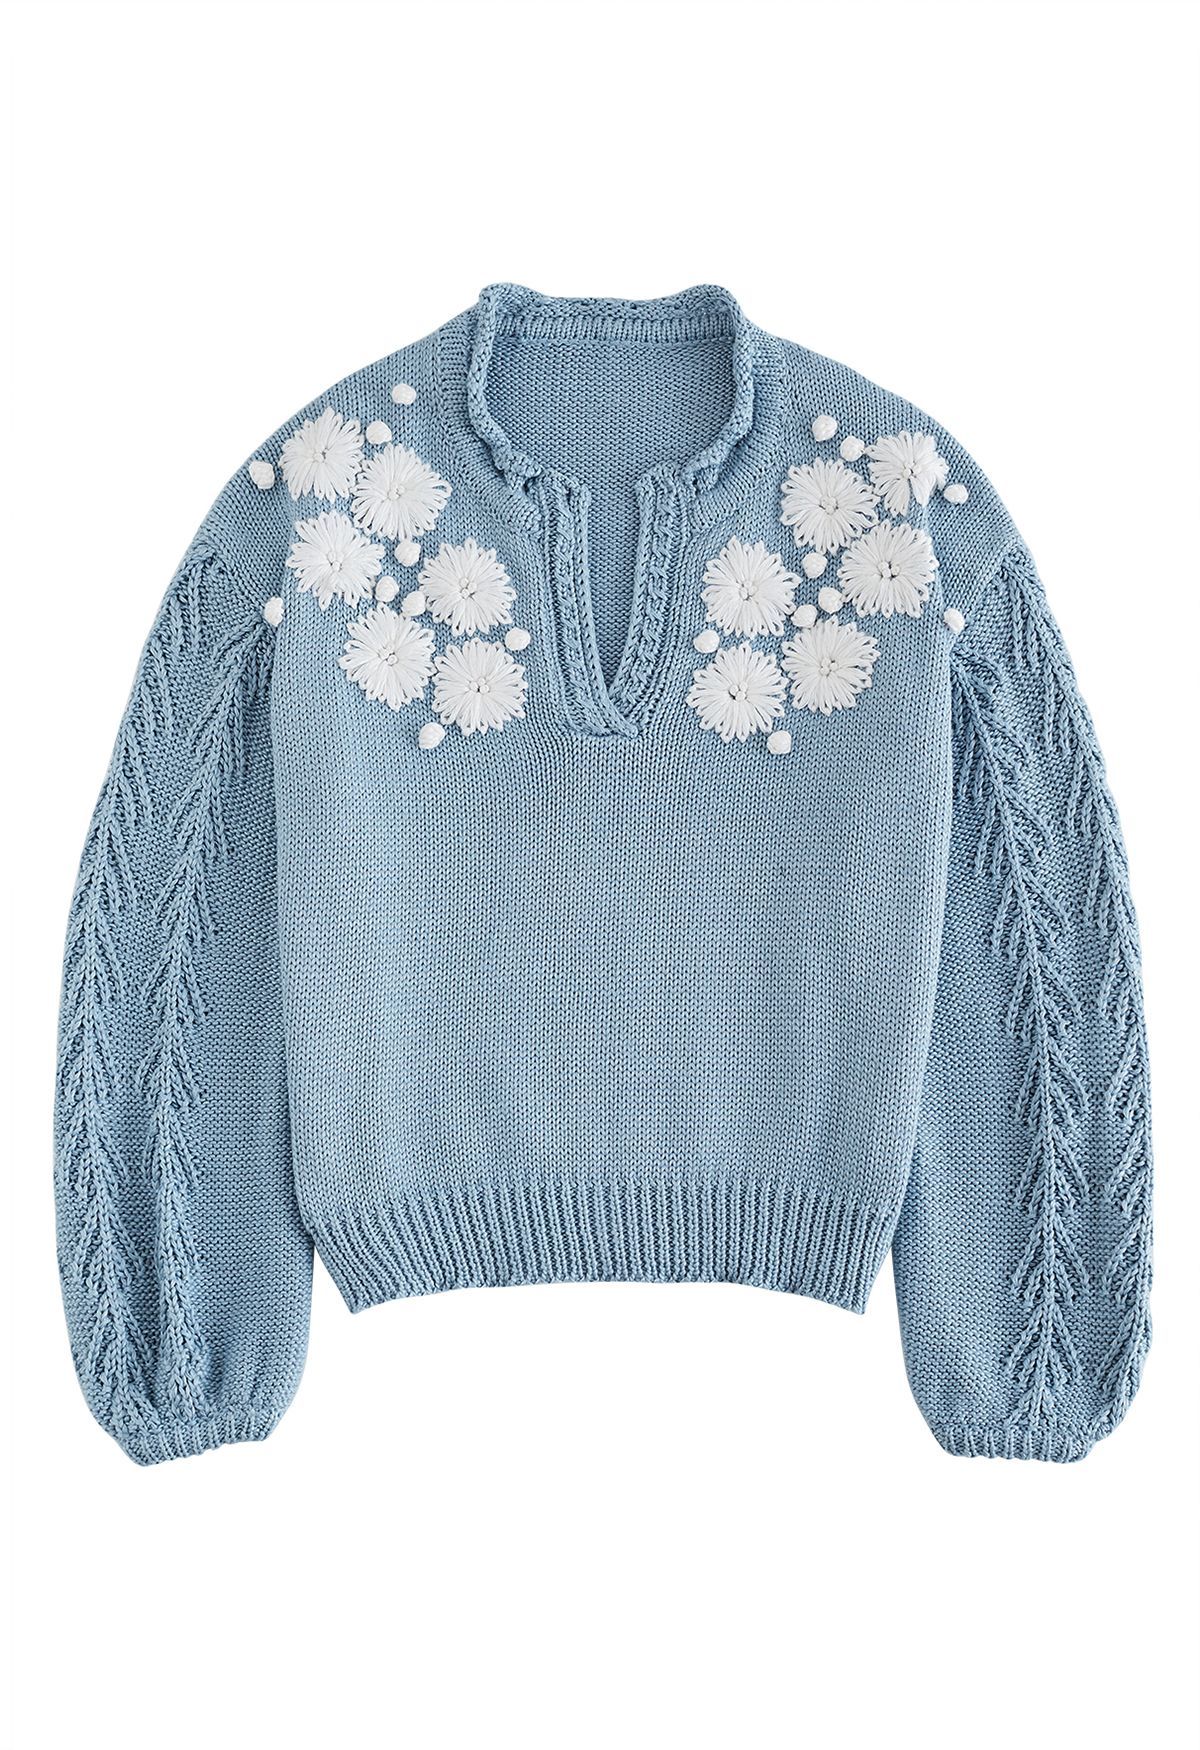 Blooming Passion Floral Stitch V-Neck Knit Sweater in Blue | Chicwish